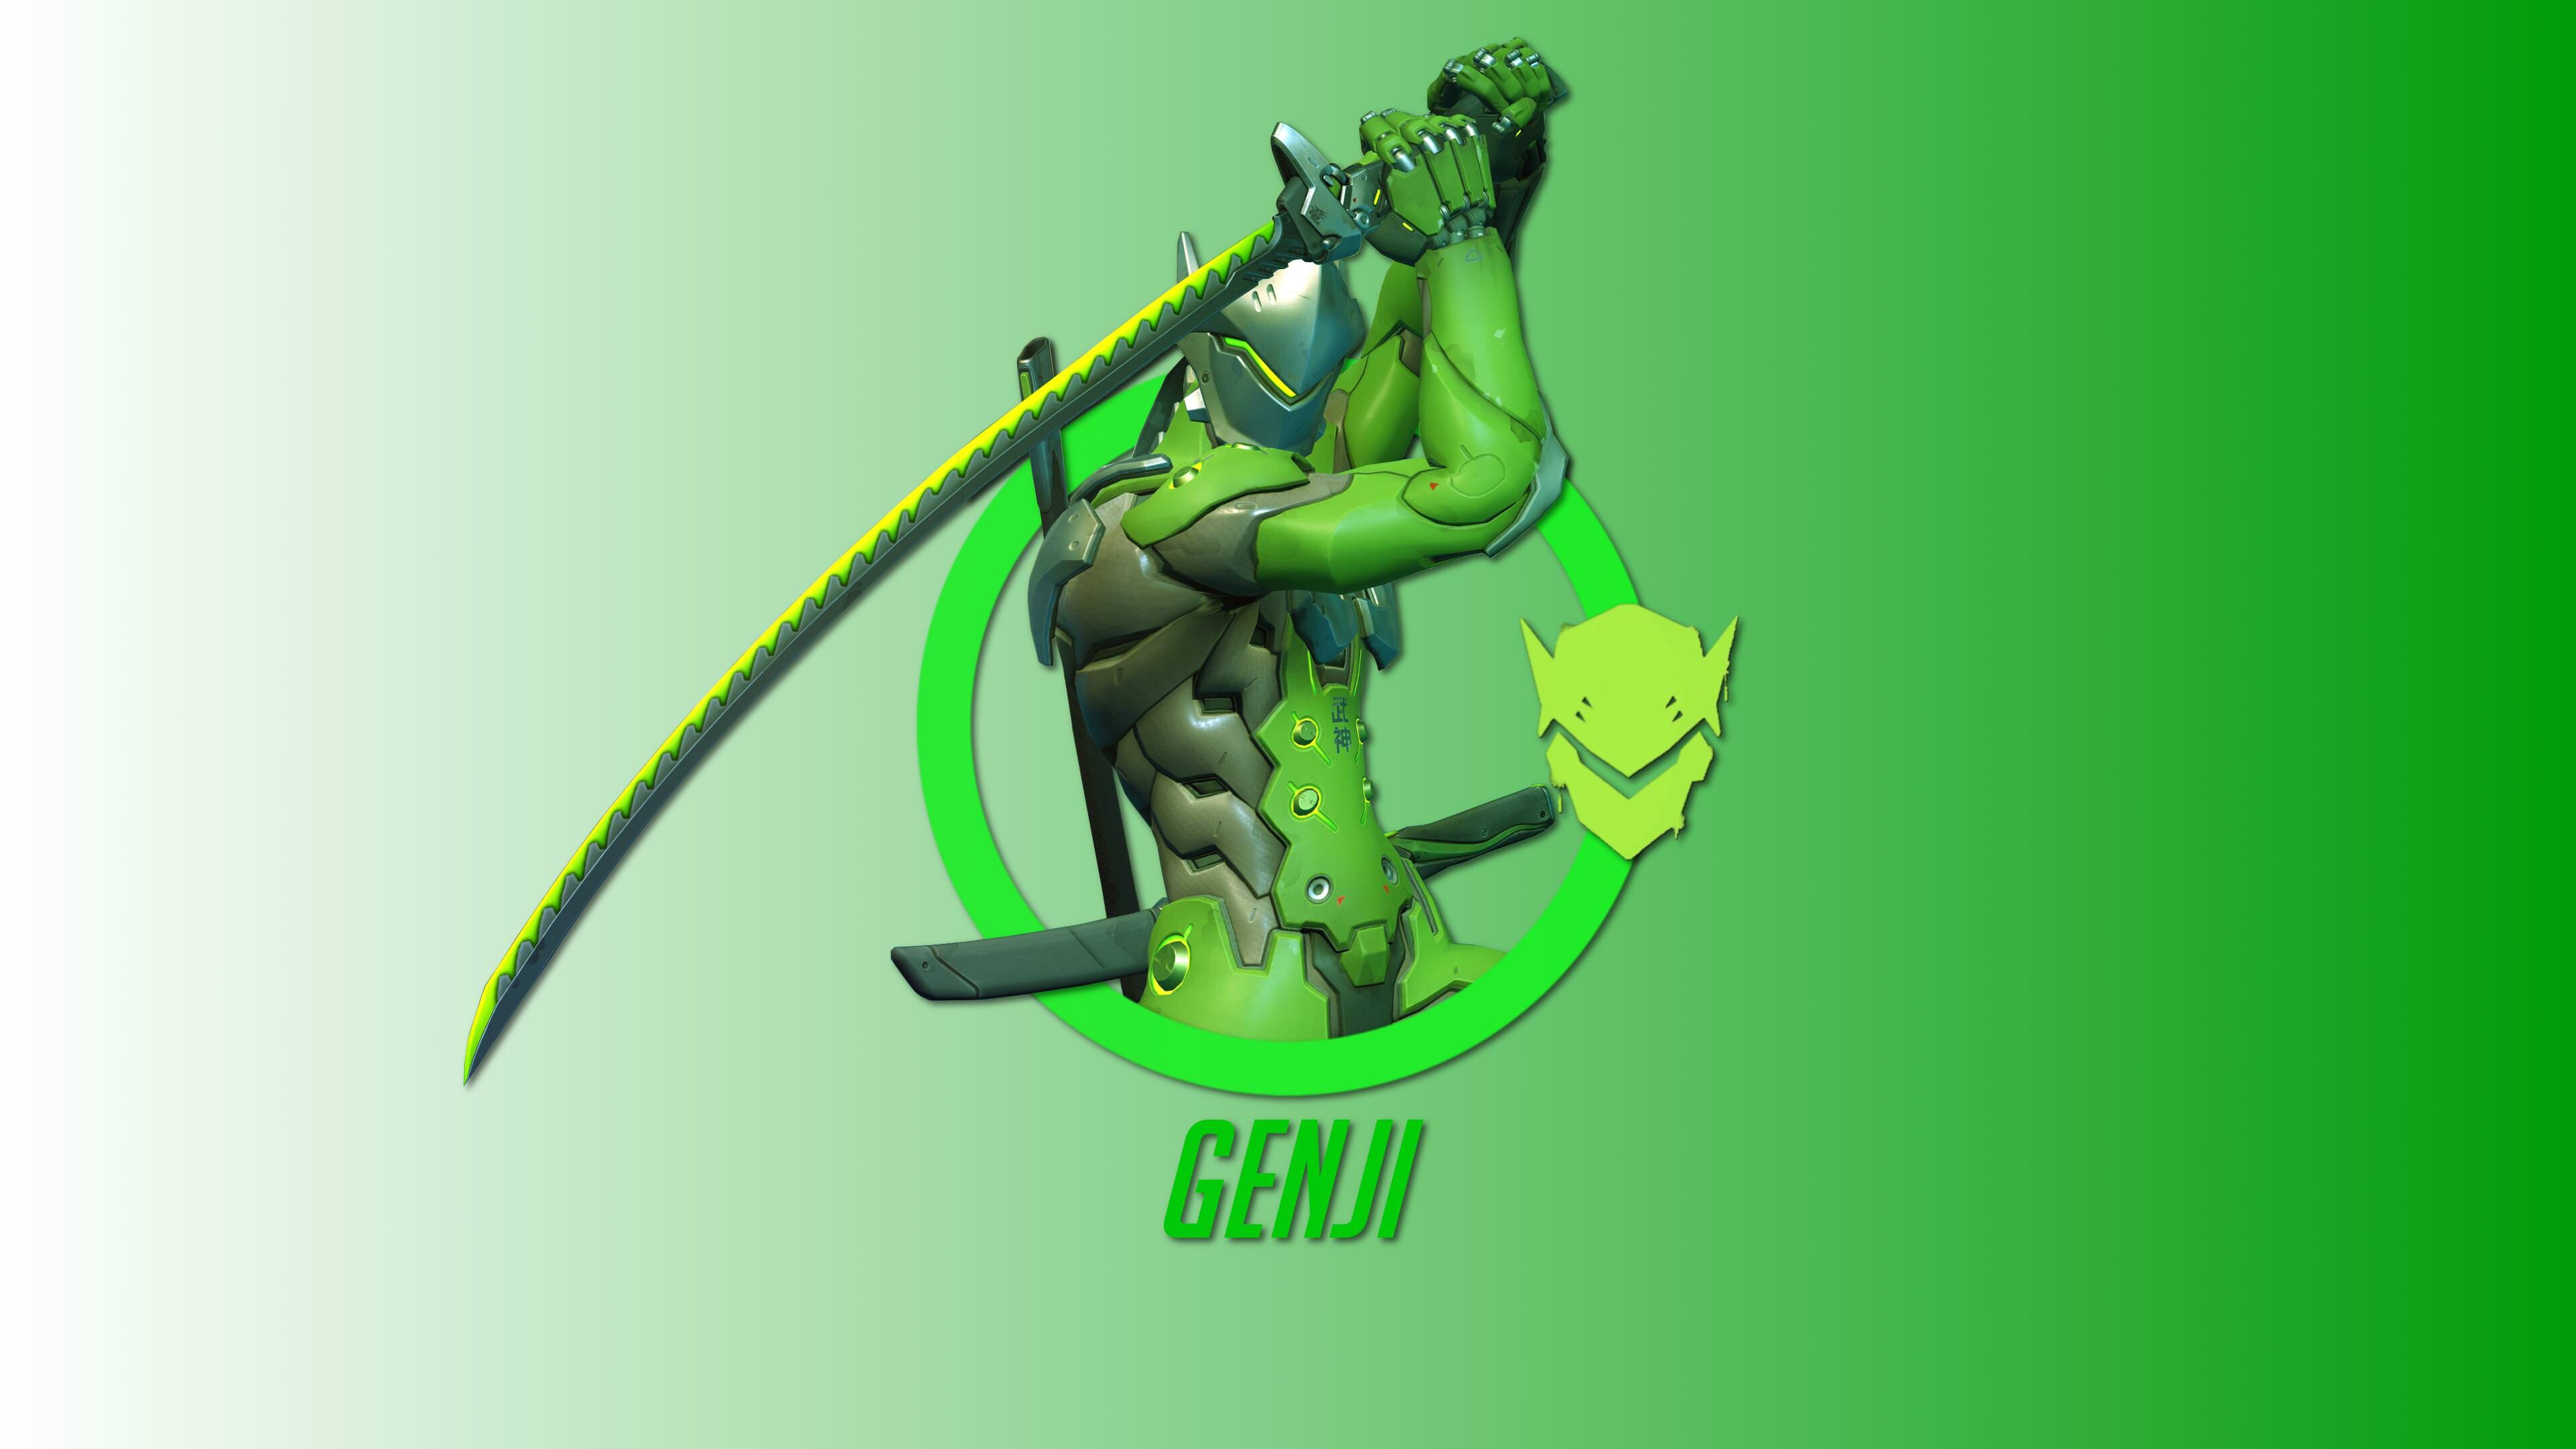 Genji: Overwatch hero, Can climb almost any vertical surface with Cyber-Agility. 3840x2160 4K Background.